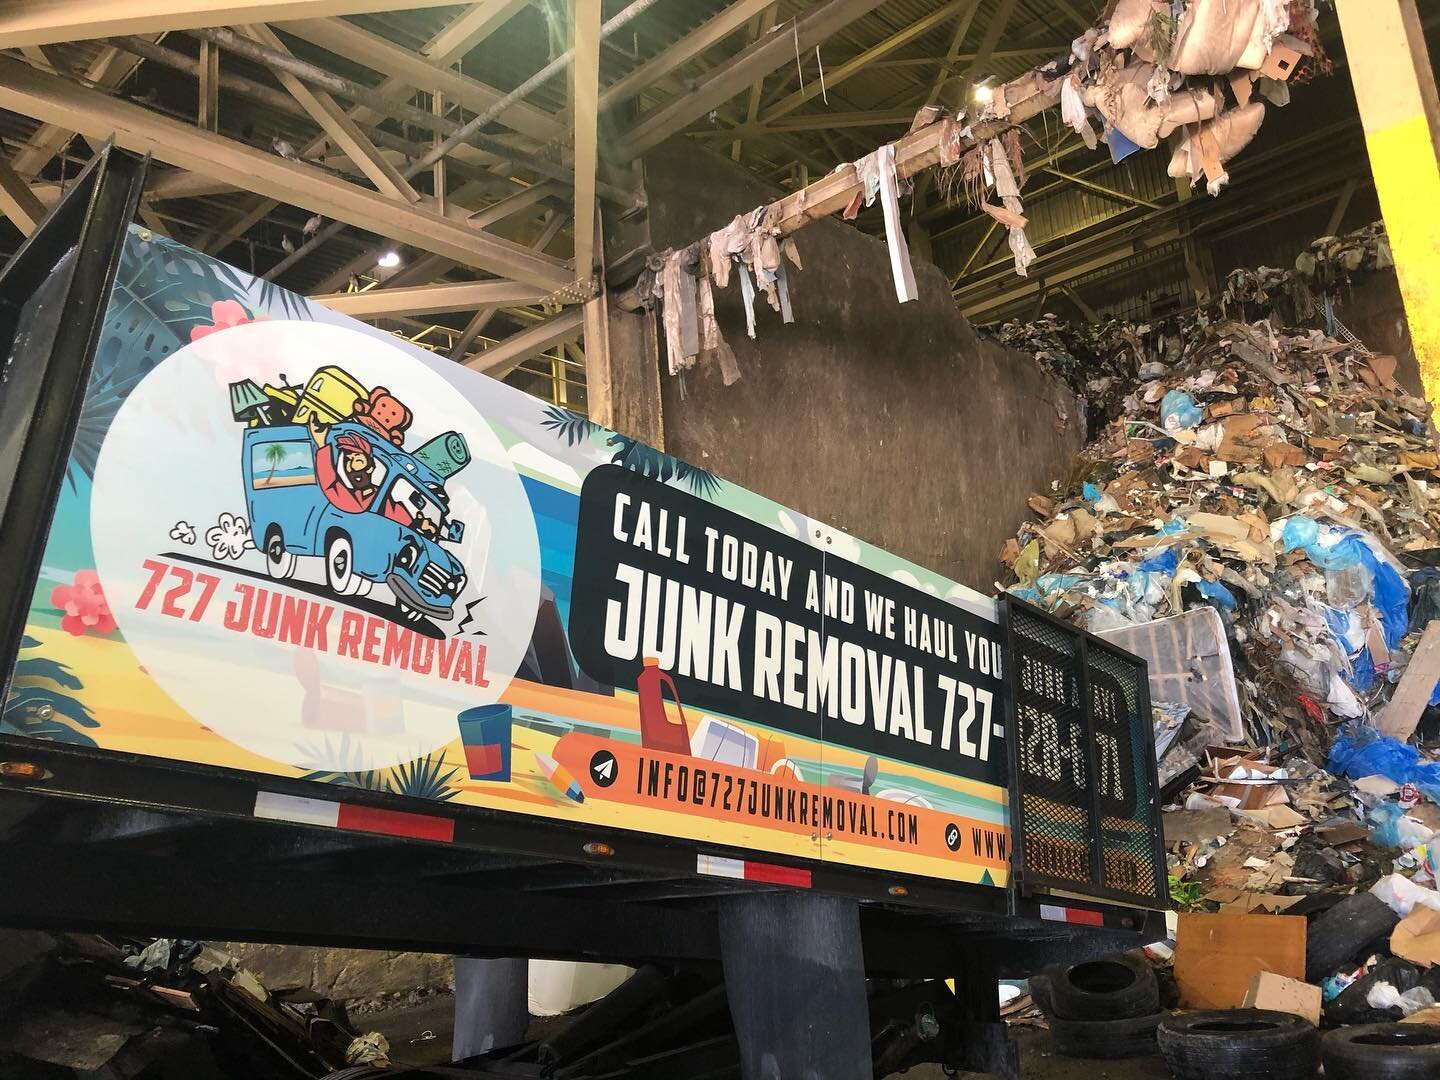 Feeling a little trashy? Call us, we got the solution to the pollution. 🚂 🗑
&bull;
📲 Call For Instant Quote!
(727) 828-6171
&bull;
Call today for a FREE quote to haul your junk. Services starting as low as $99 including dump fees.
&bull;
What&rsqu